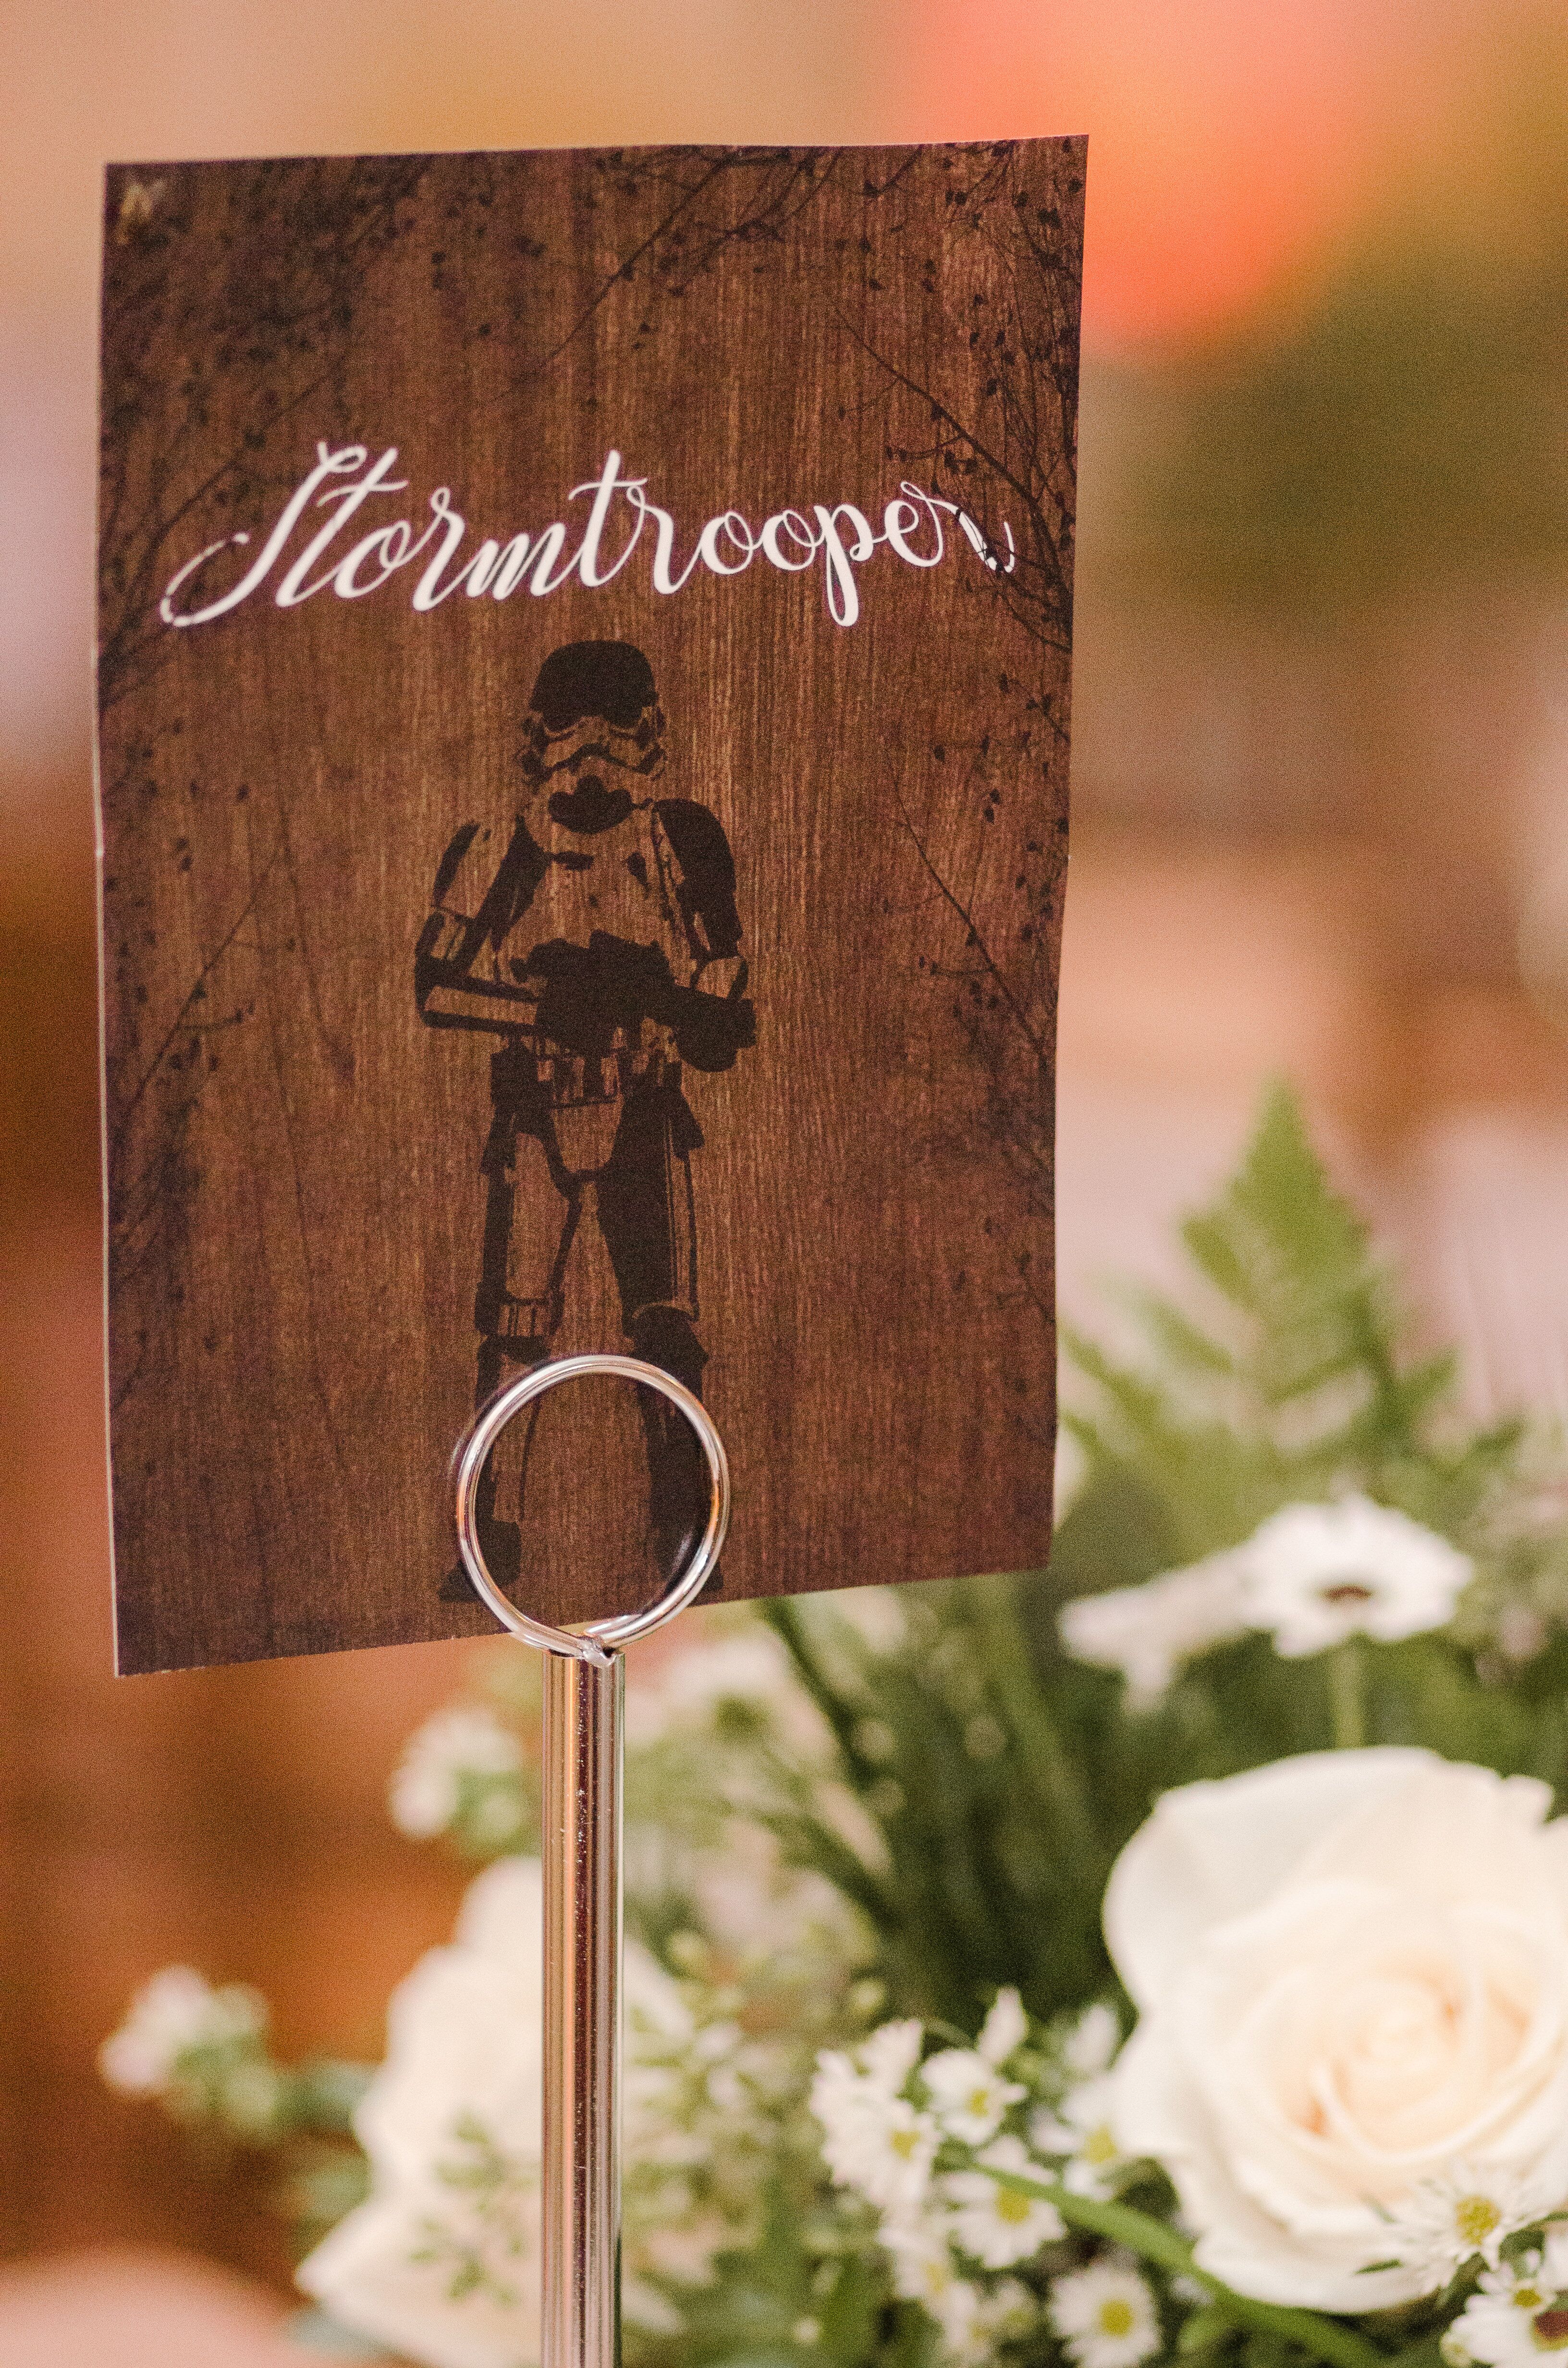 Star Wars themed table numbers